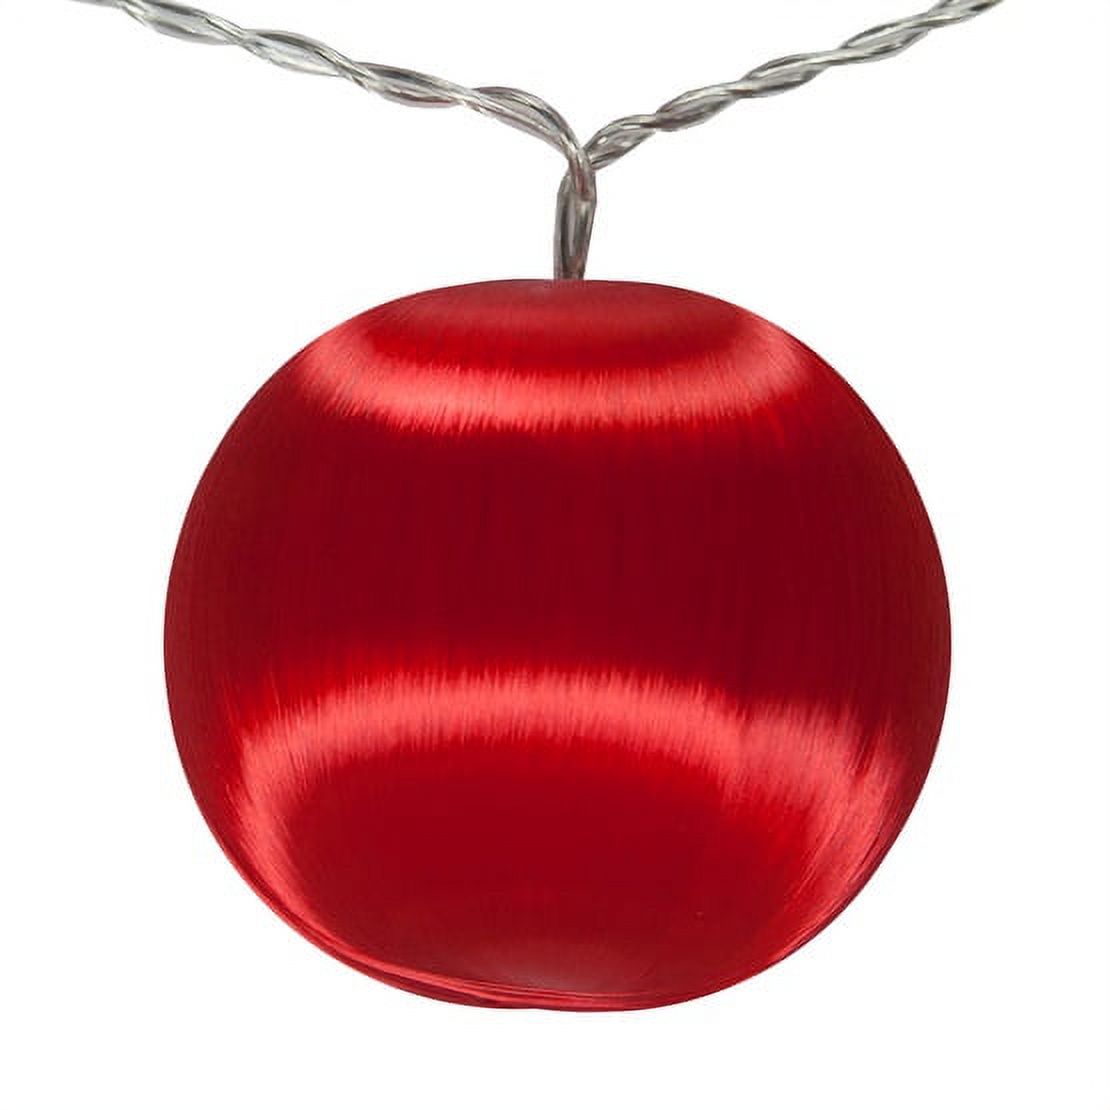 Satin Ball Ornament Lights, Battery Operated, Festive Holiday Christmas Ornament String Lights, 10 LED Lights - image 2 of 3